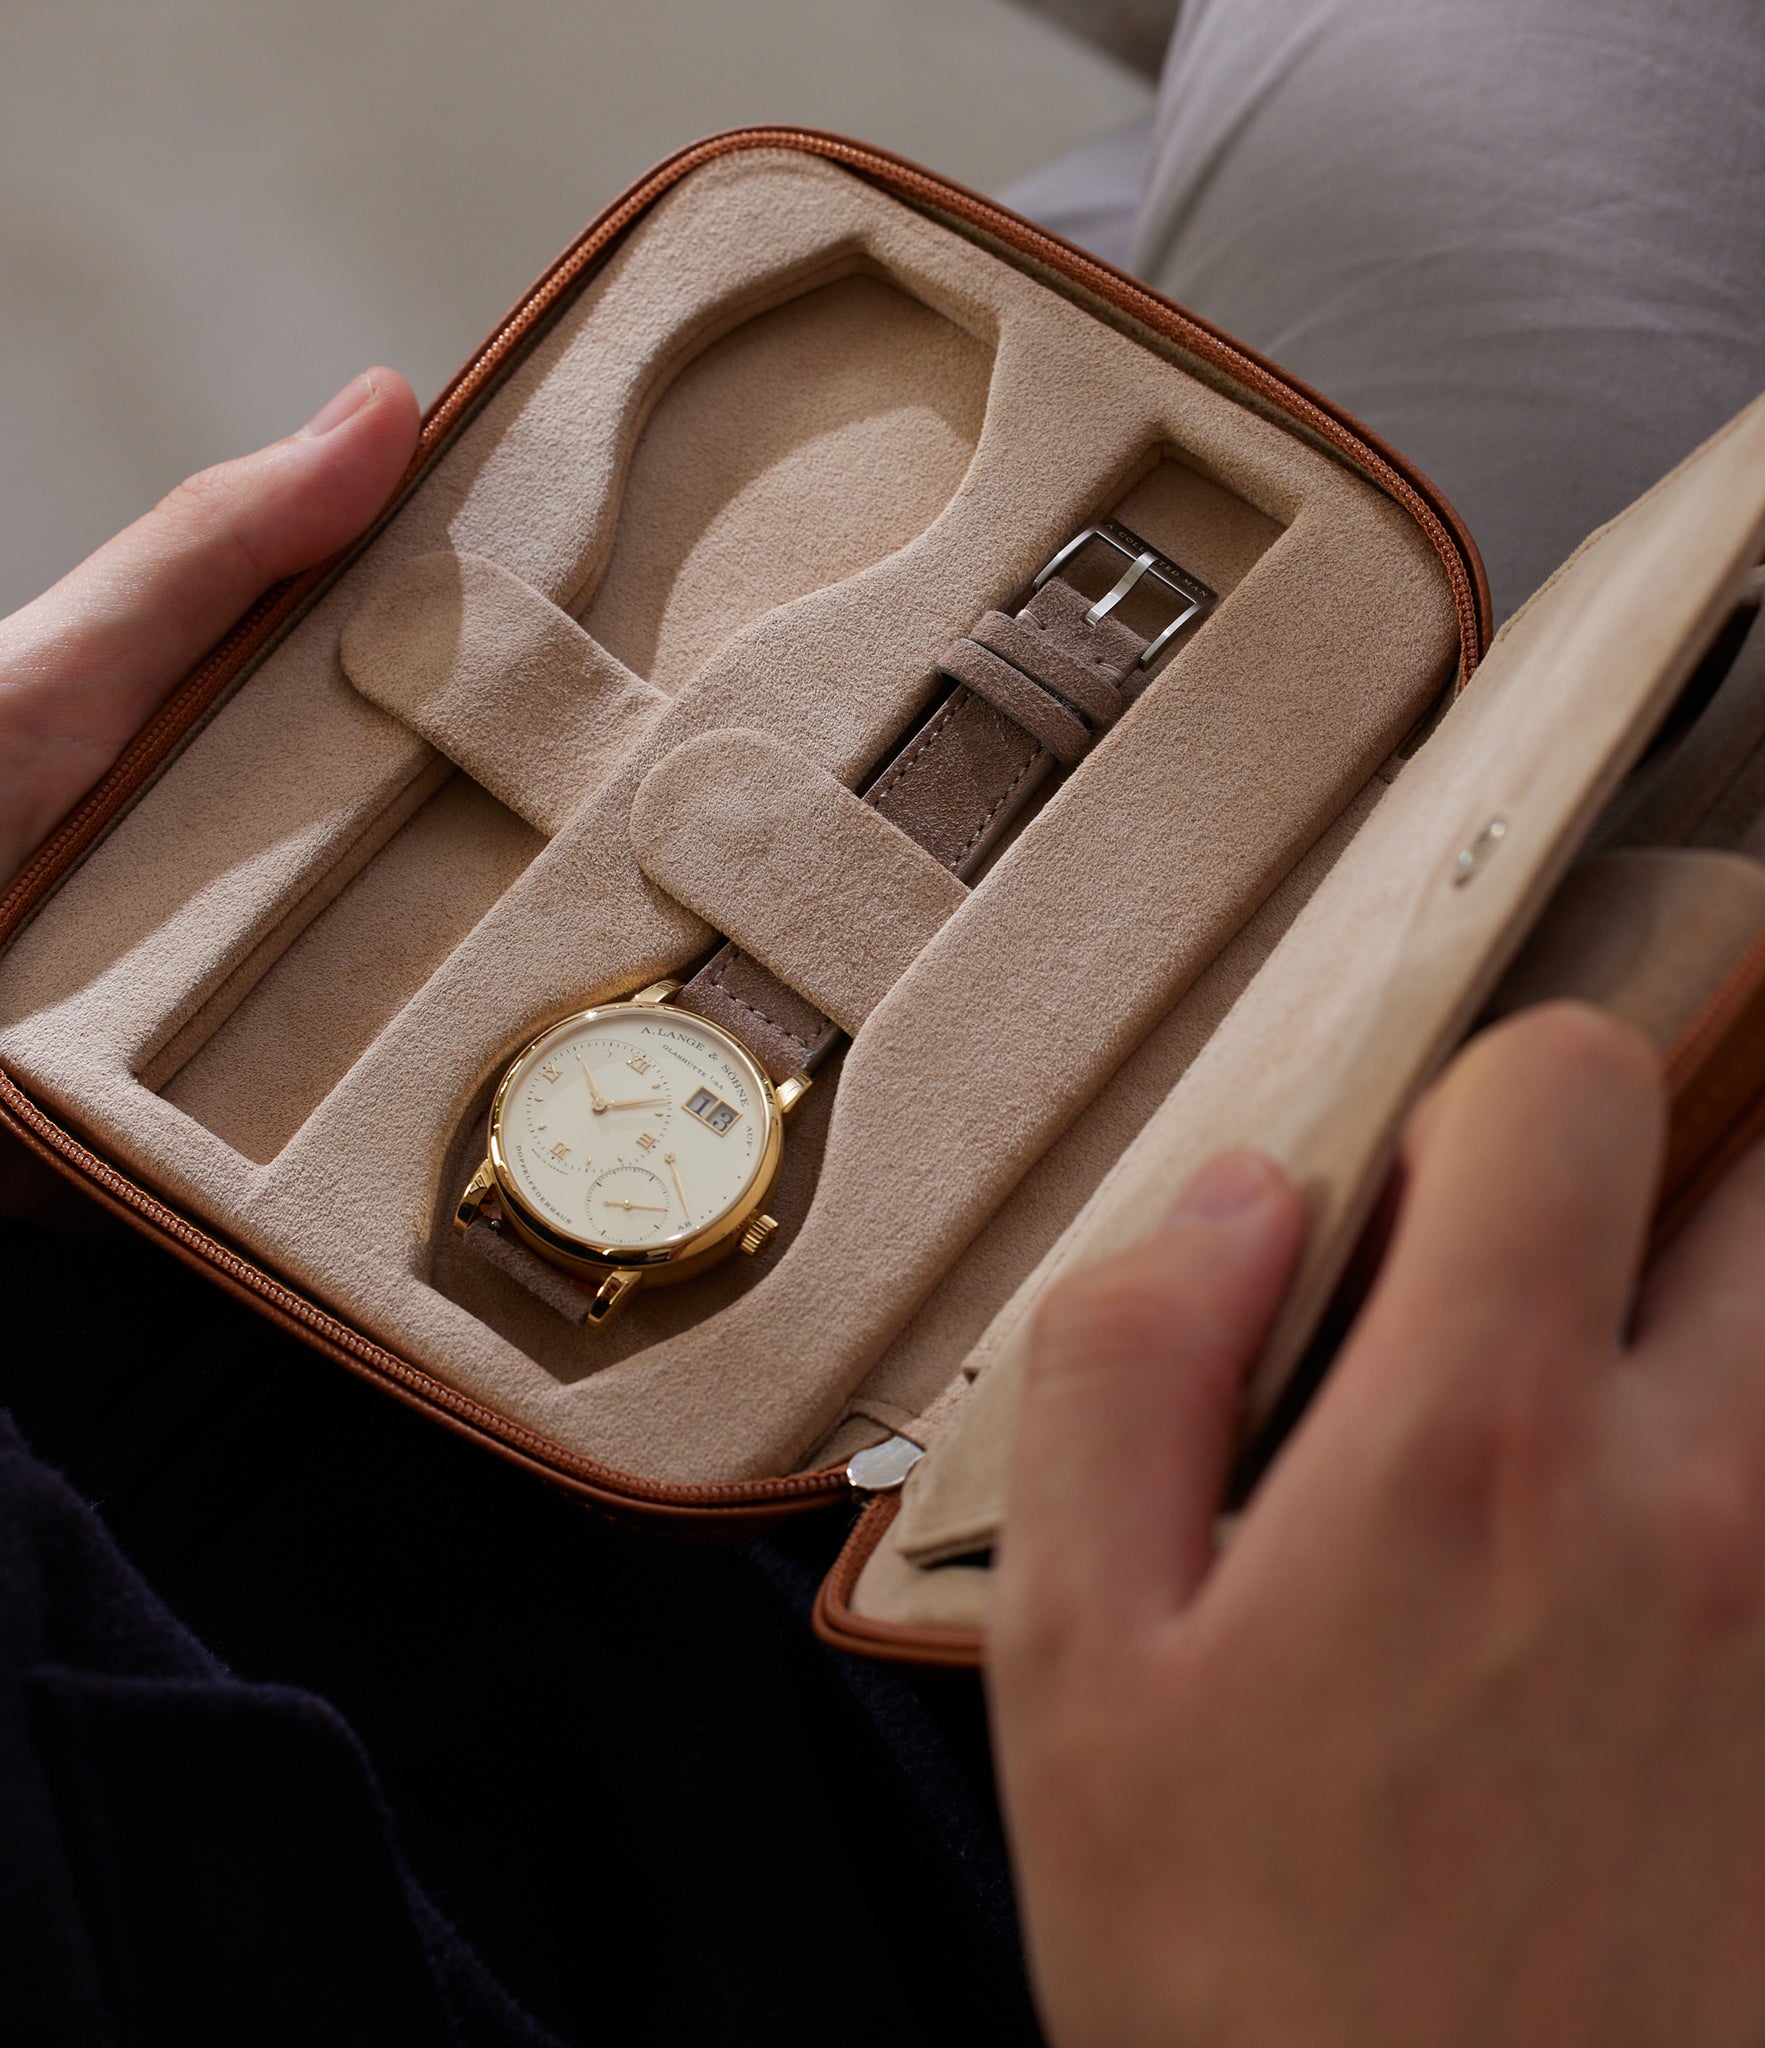 Zurich, four-watch folio Four-watch slim folio in whisky-tan grained leather | Available World Wide | A Collected Man